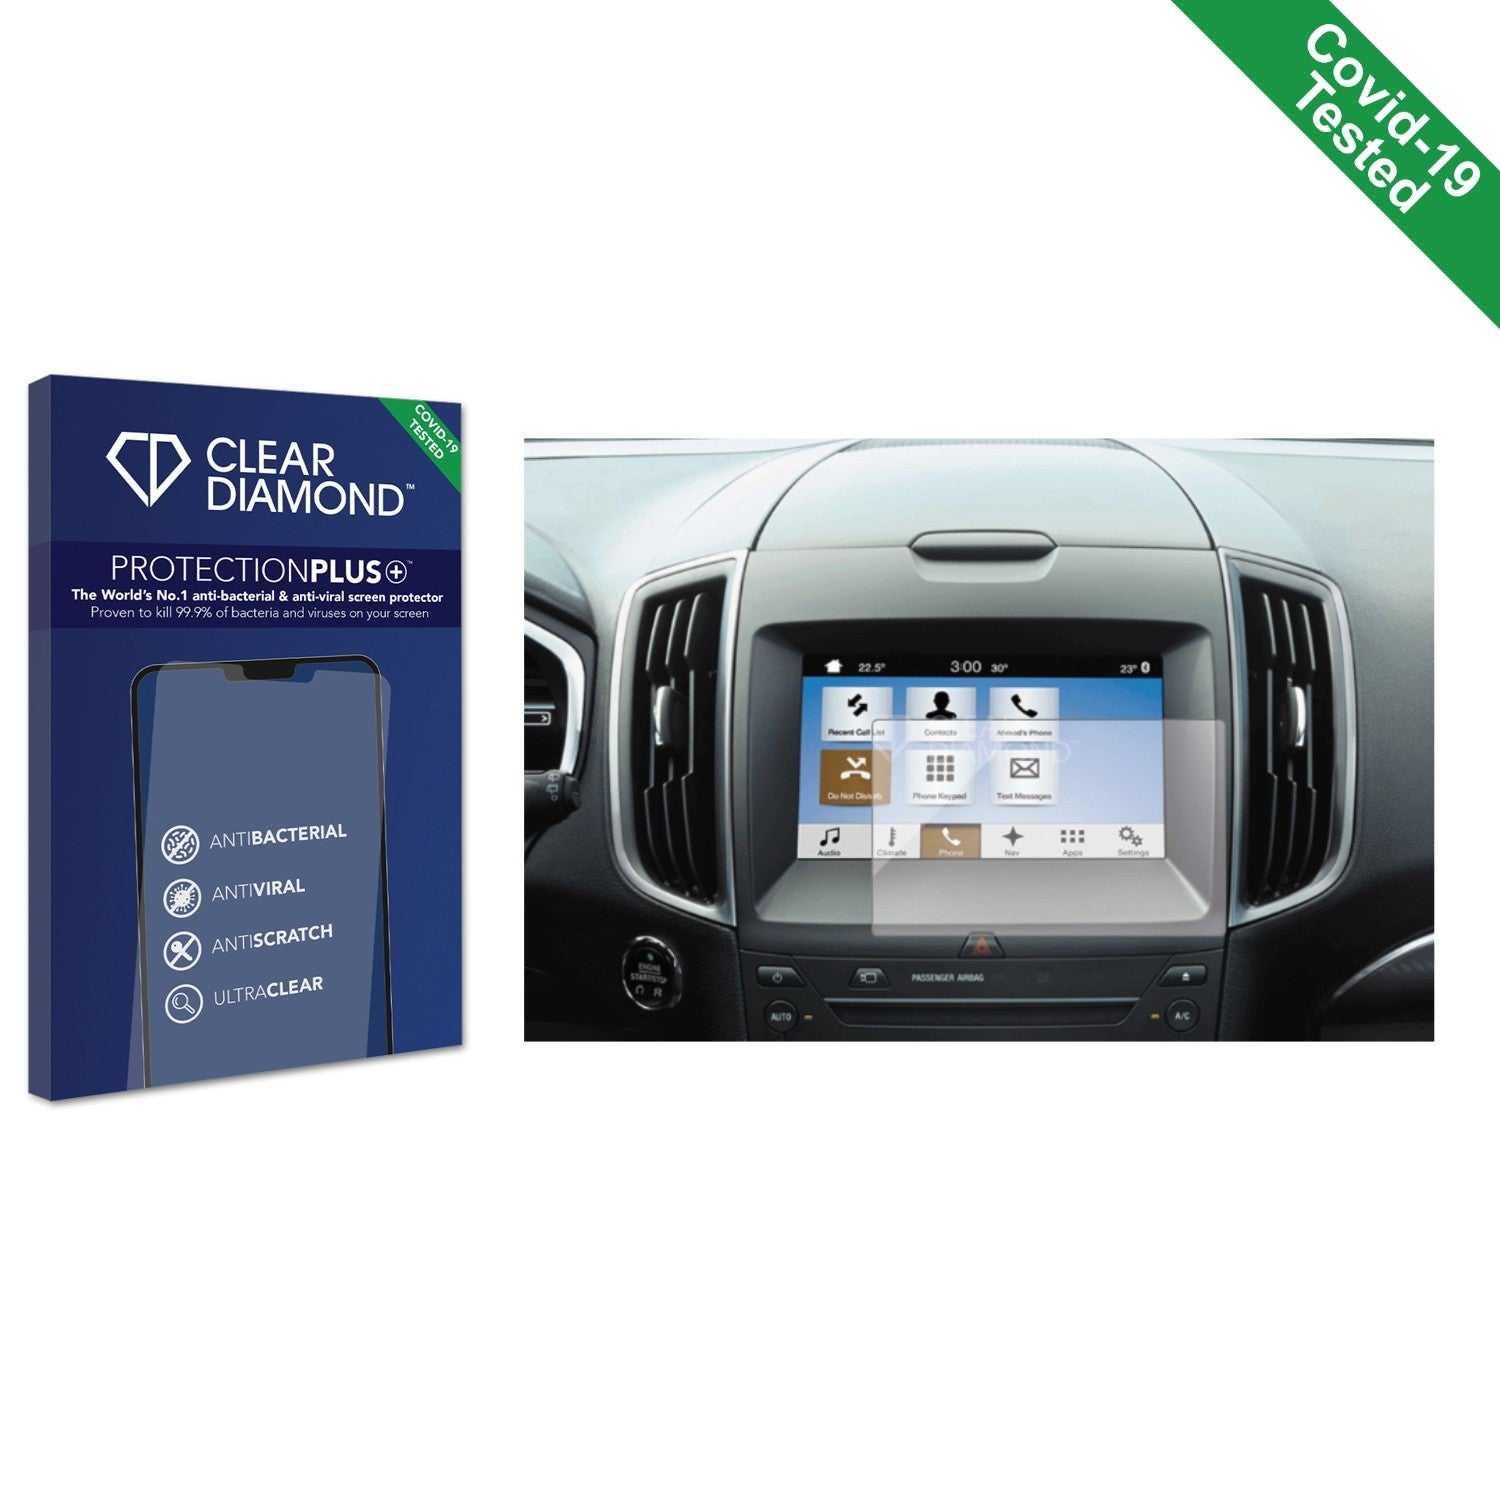 ScreenShield, Clear Diamond Anti-viral Screen Protector for Ford Ranger XLT 2022 SYNC2 8"